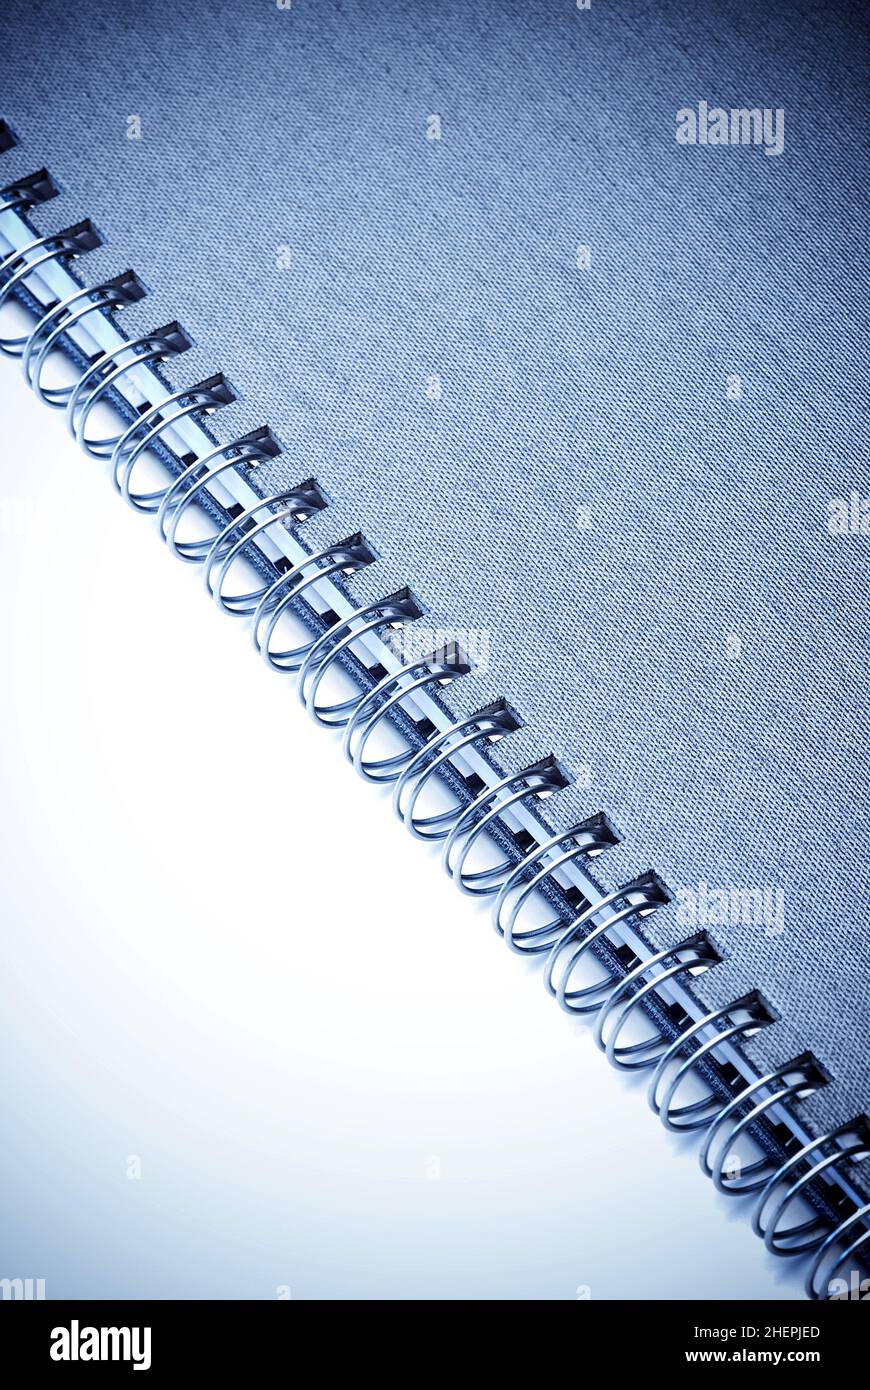 note-book with spiral binding, detail Stock Photo